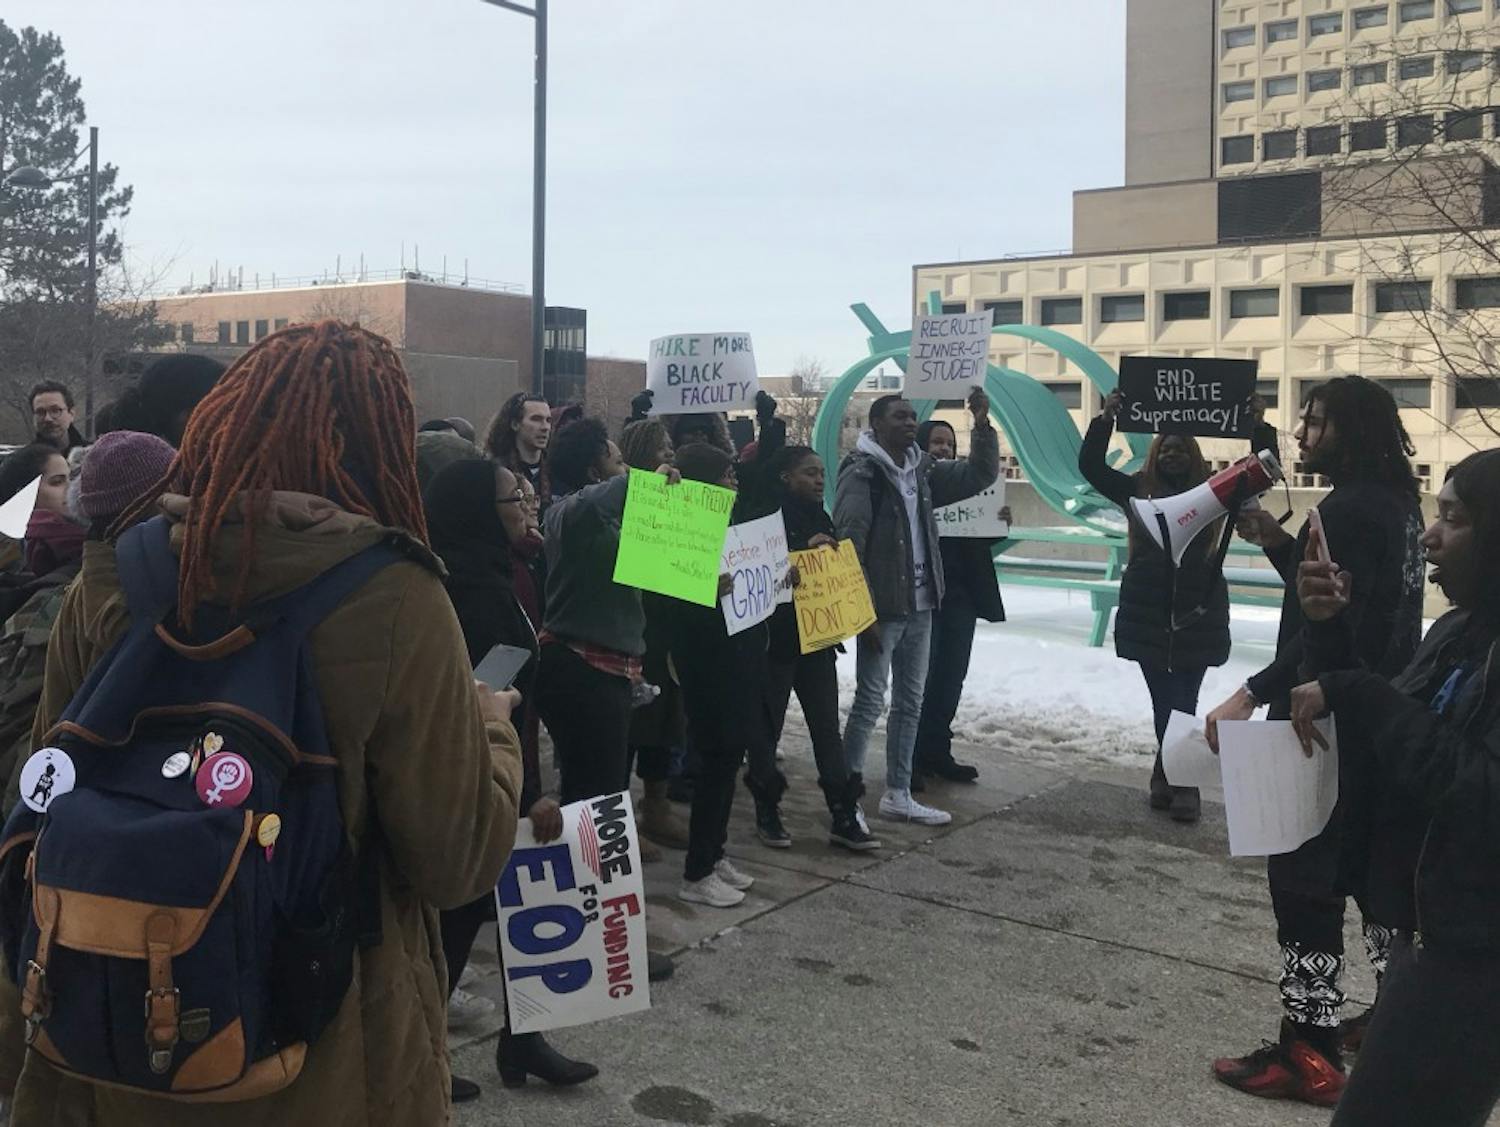 Students gathered in the academic spine Friday afternoon to protest UB’s treatment of the African and African American Studies program. The protesters marched to the Student Union to speak out against the “war” on AAS.